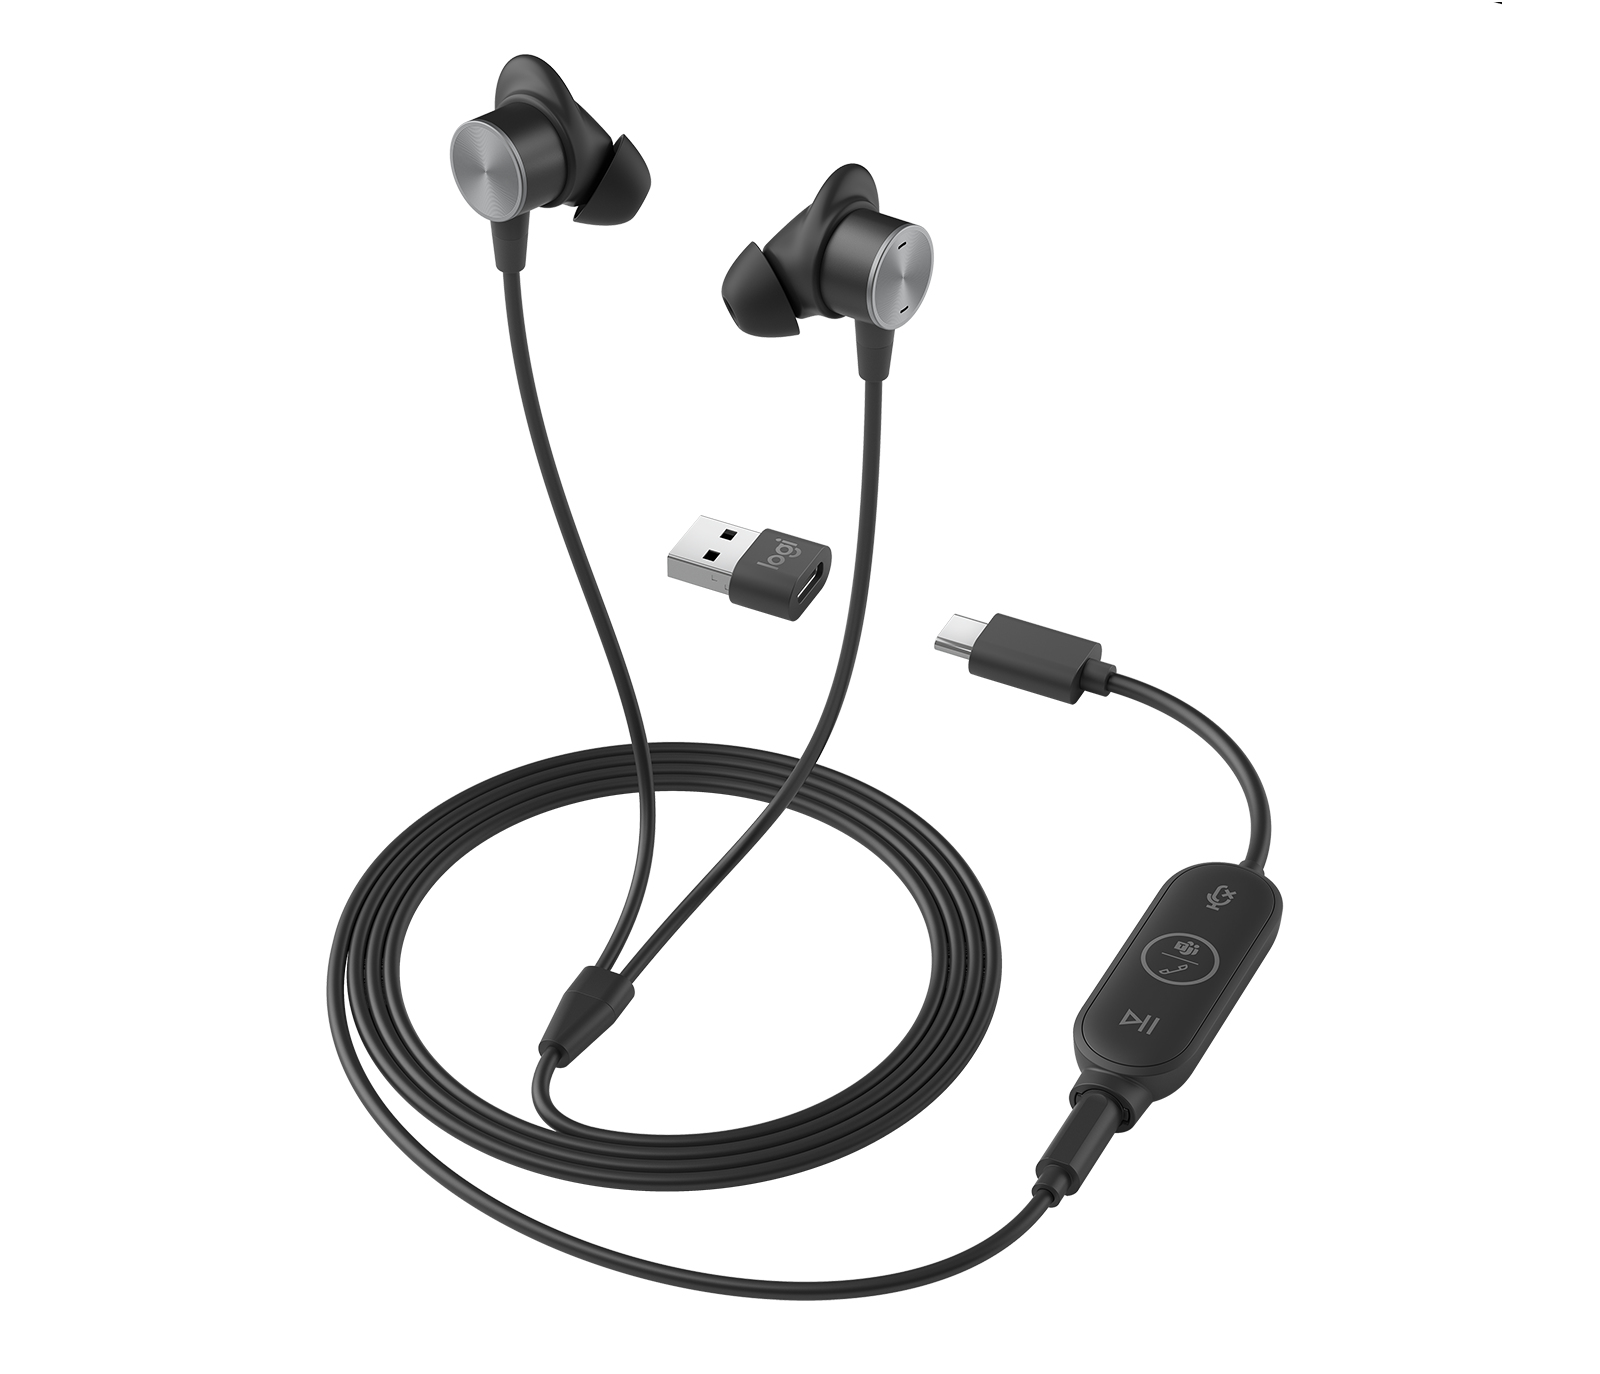 Logitech Zone Wired Earbuds - Headset - in-ear - wired - 3.5 mm jack - noise isolating - graphite - Certified for Skype for Business, Certified for Microsoft Teams